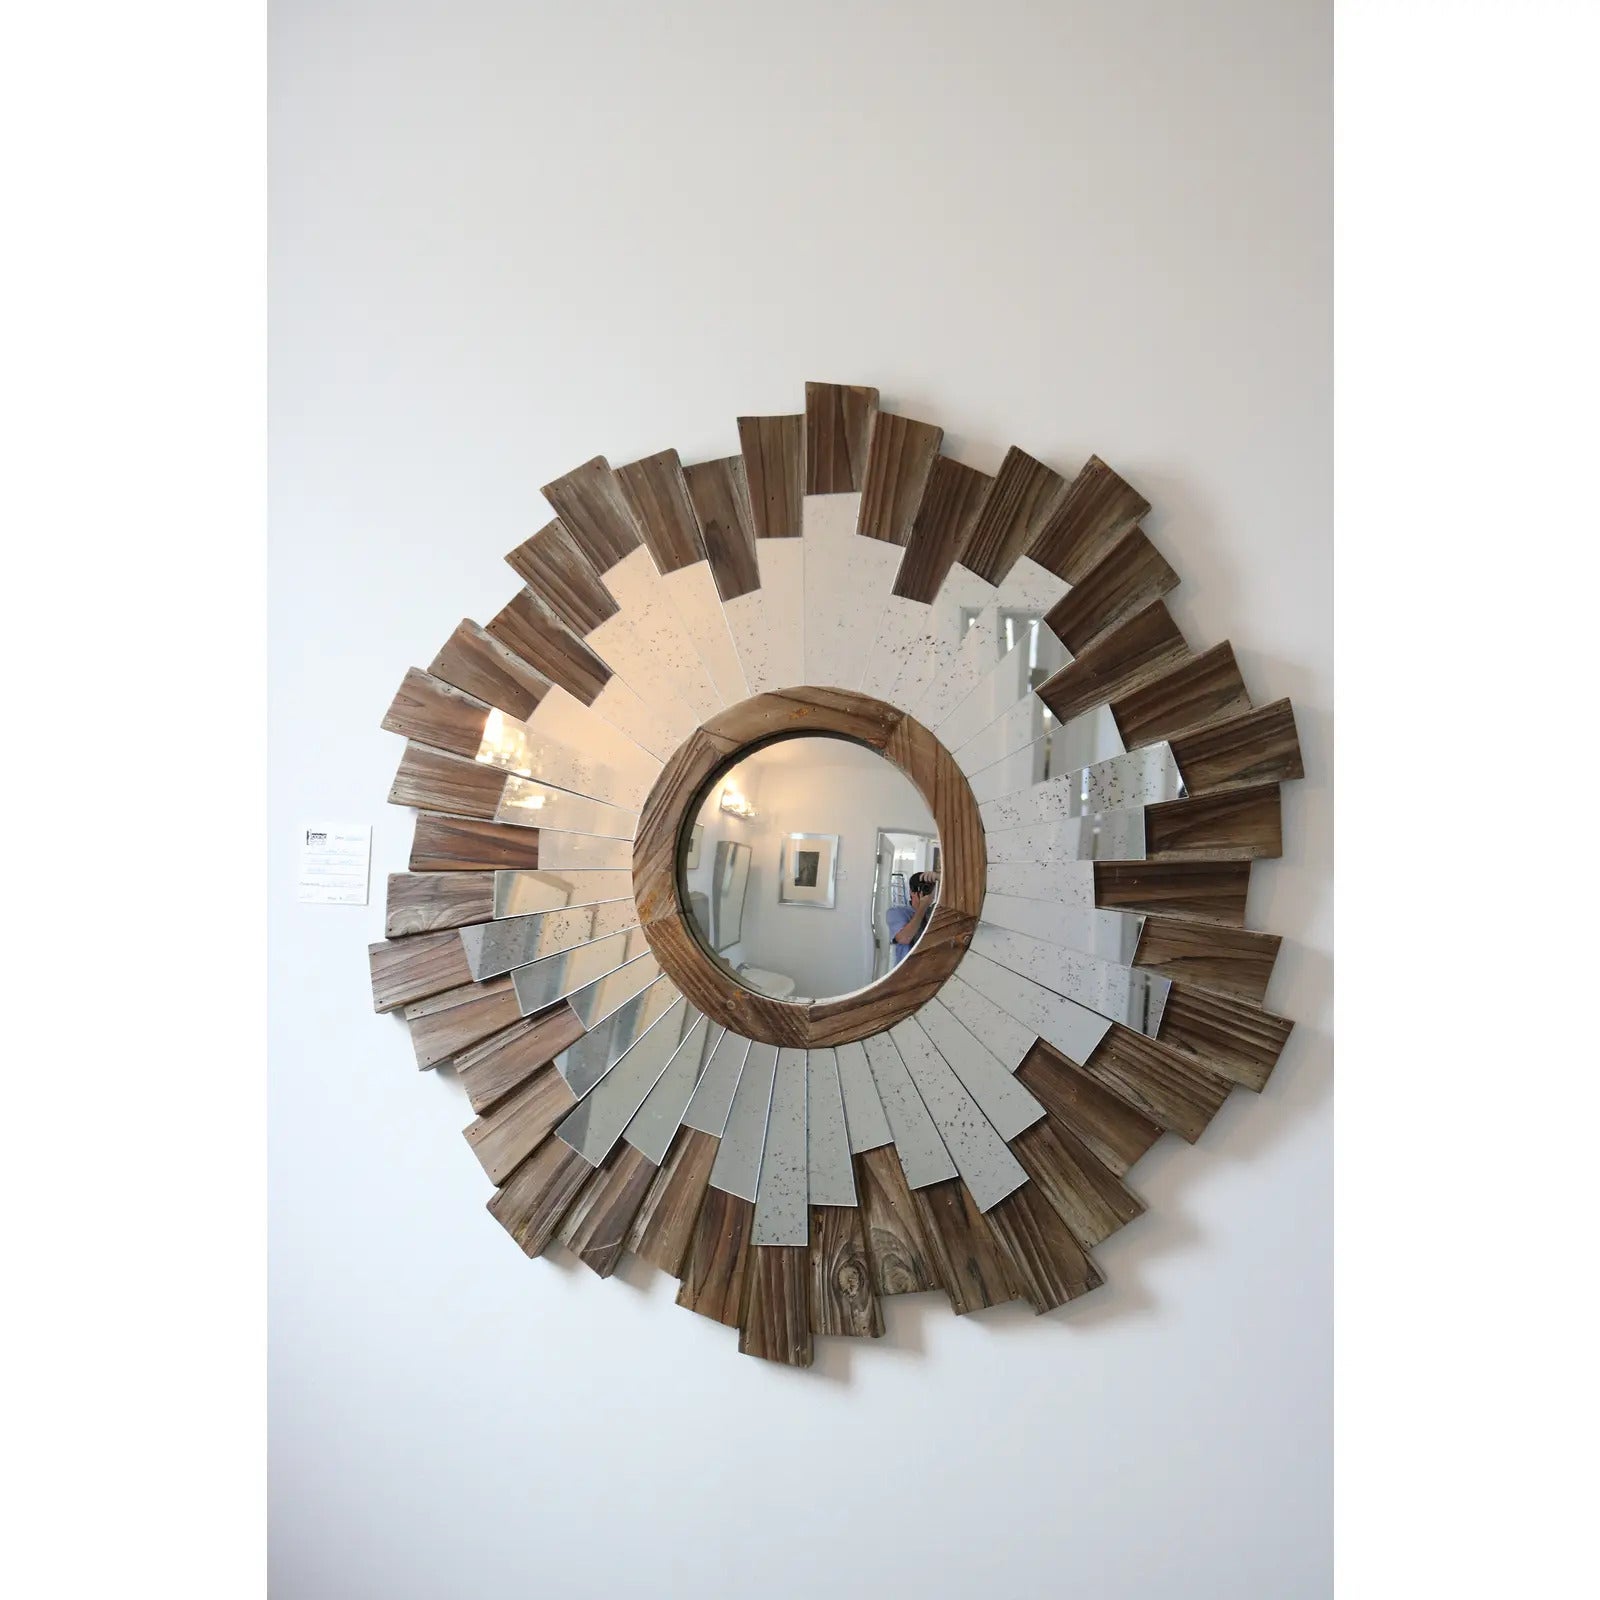 This stylish and chic midcentury inspired sunburst mirror is the perfect piece for a relaxed and natural element in your home.